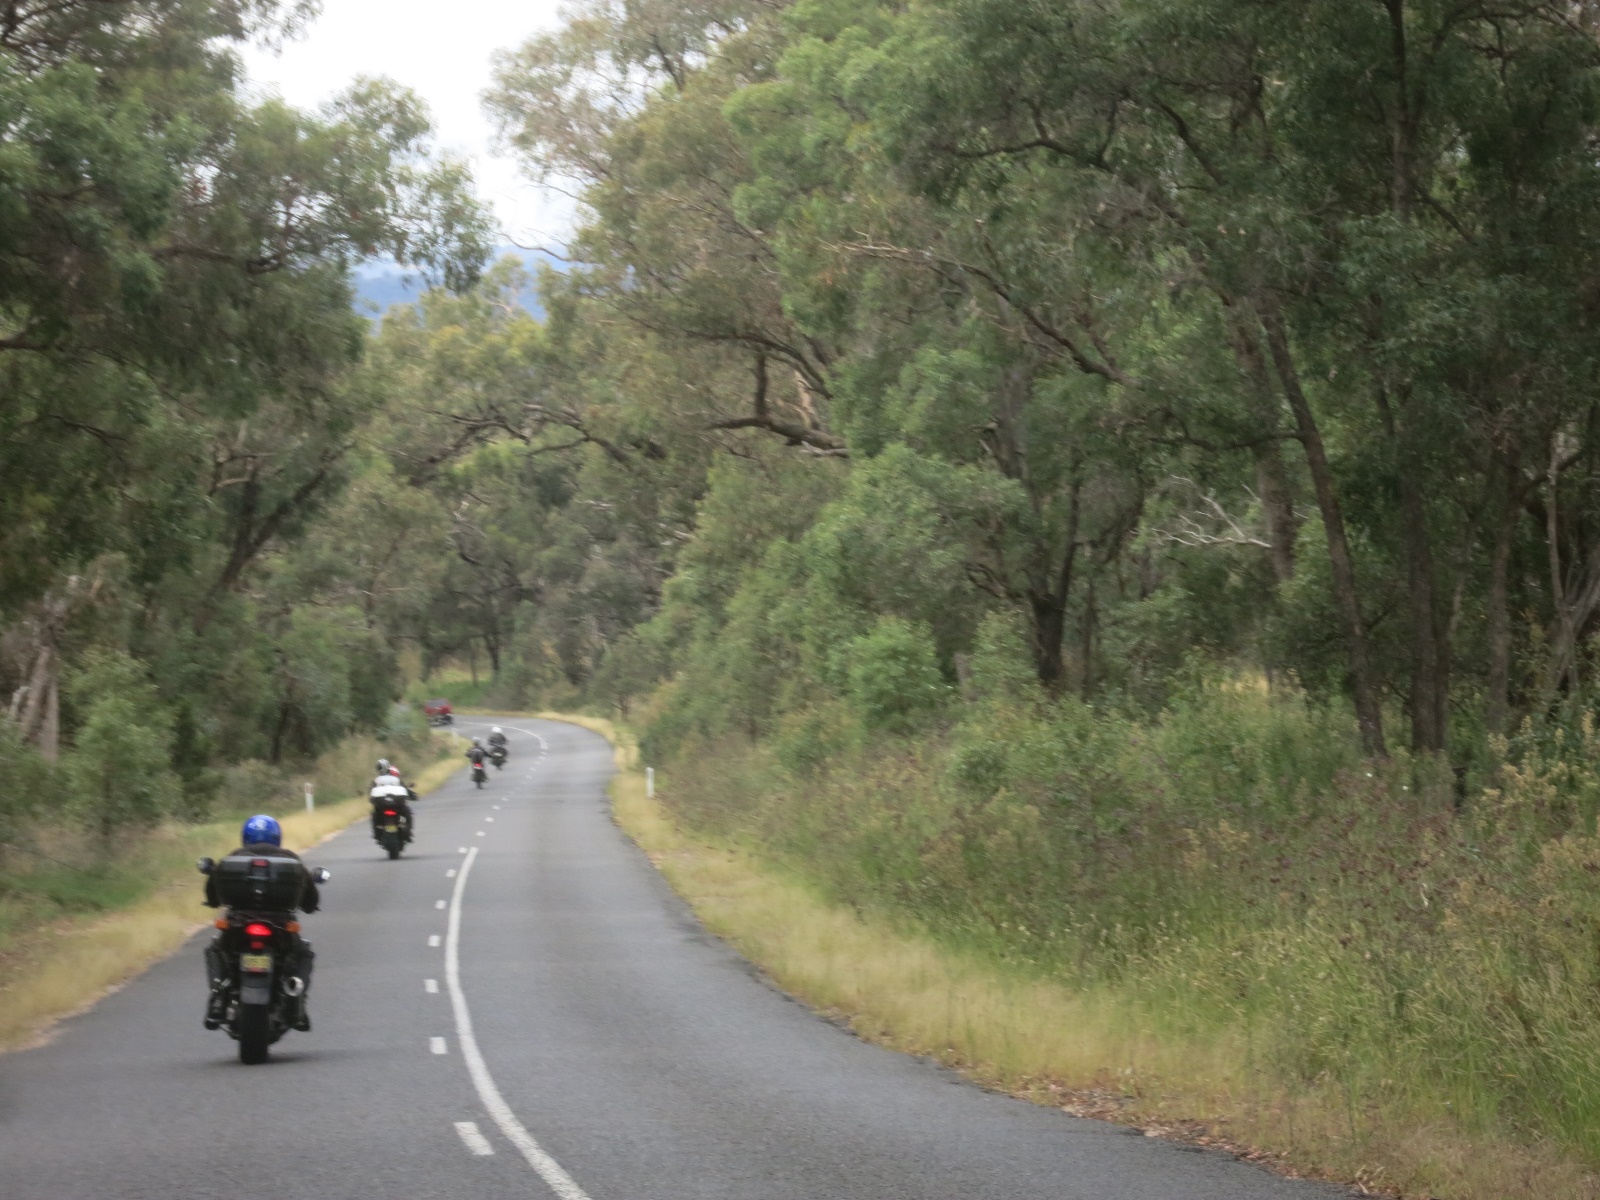 A group of motorcyclists ride down a road

Description automatically generated with medium confidence